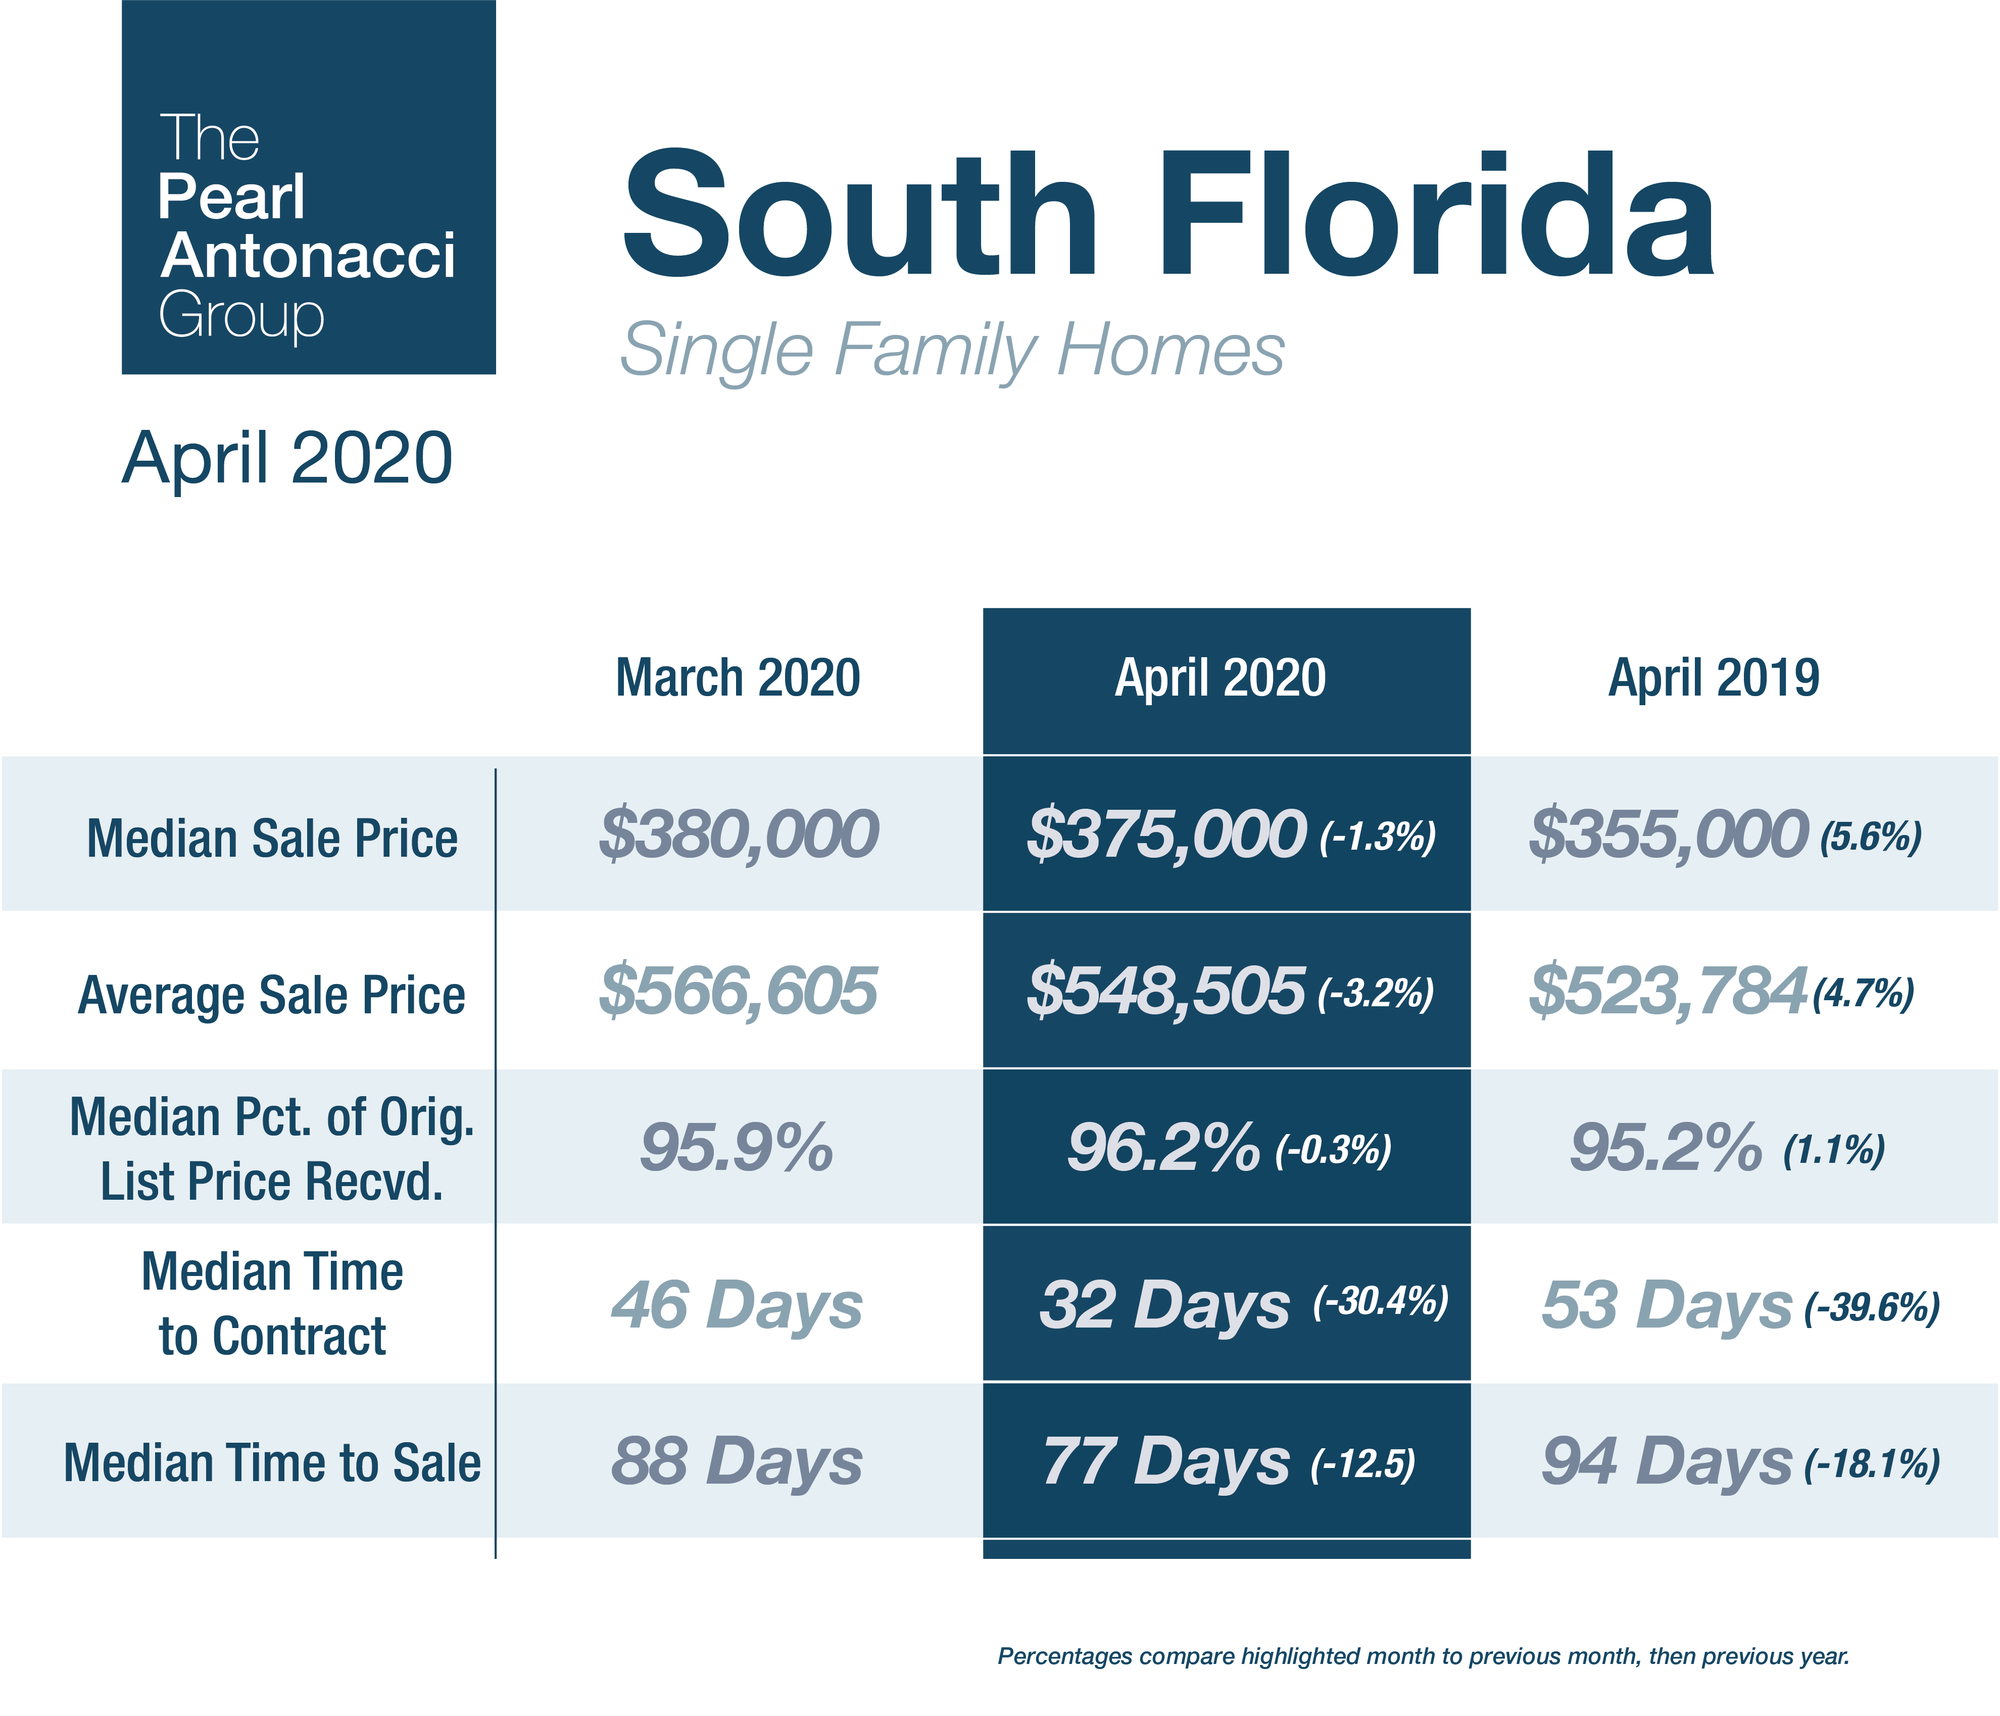 South Florida Homes Are Selling Quickly